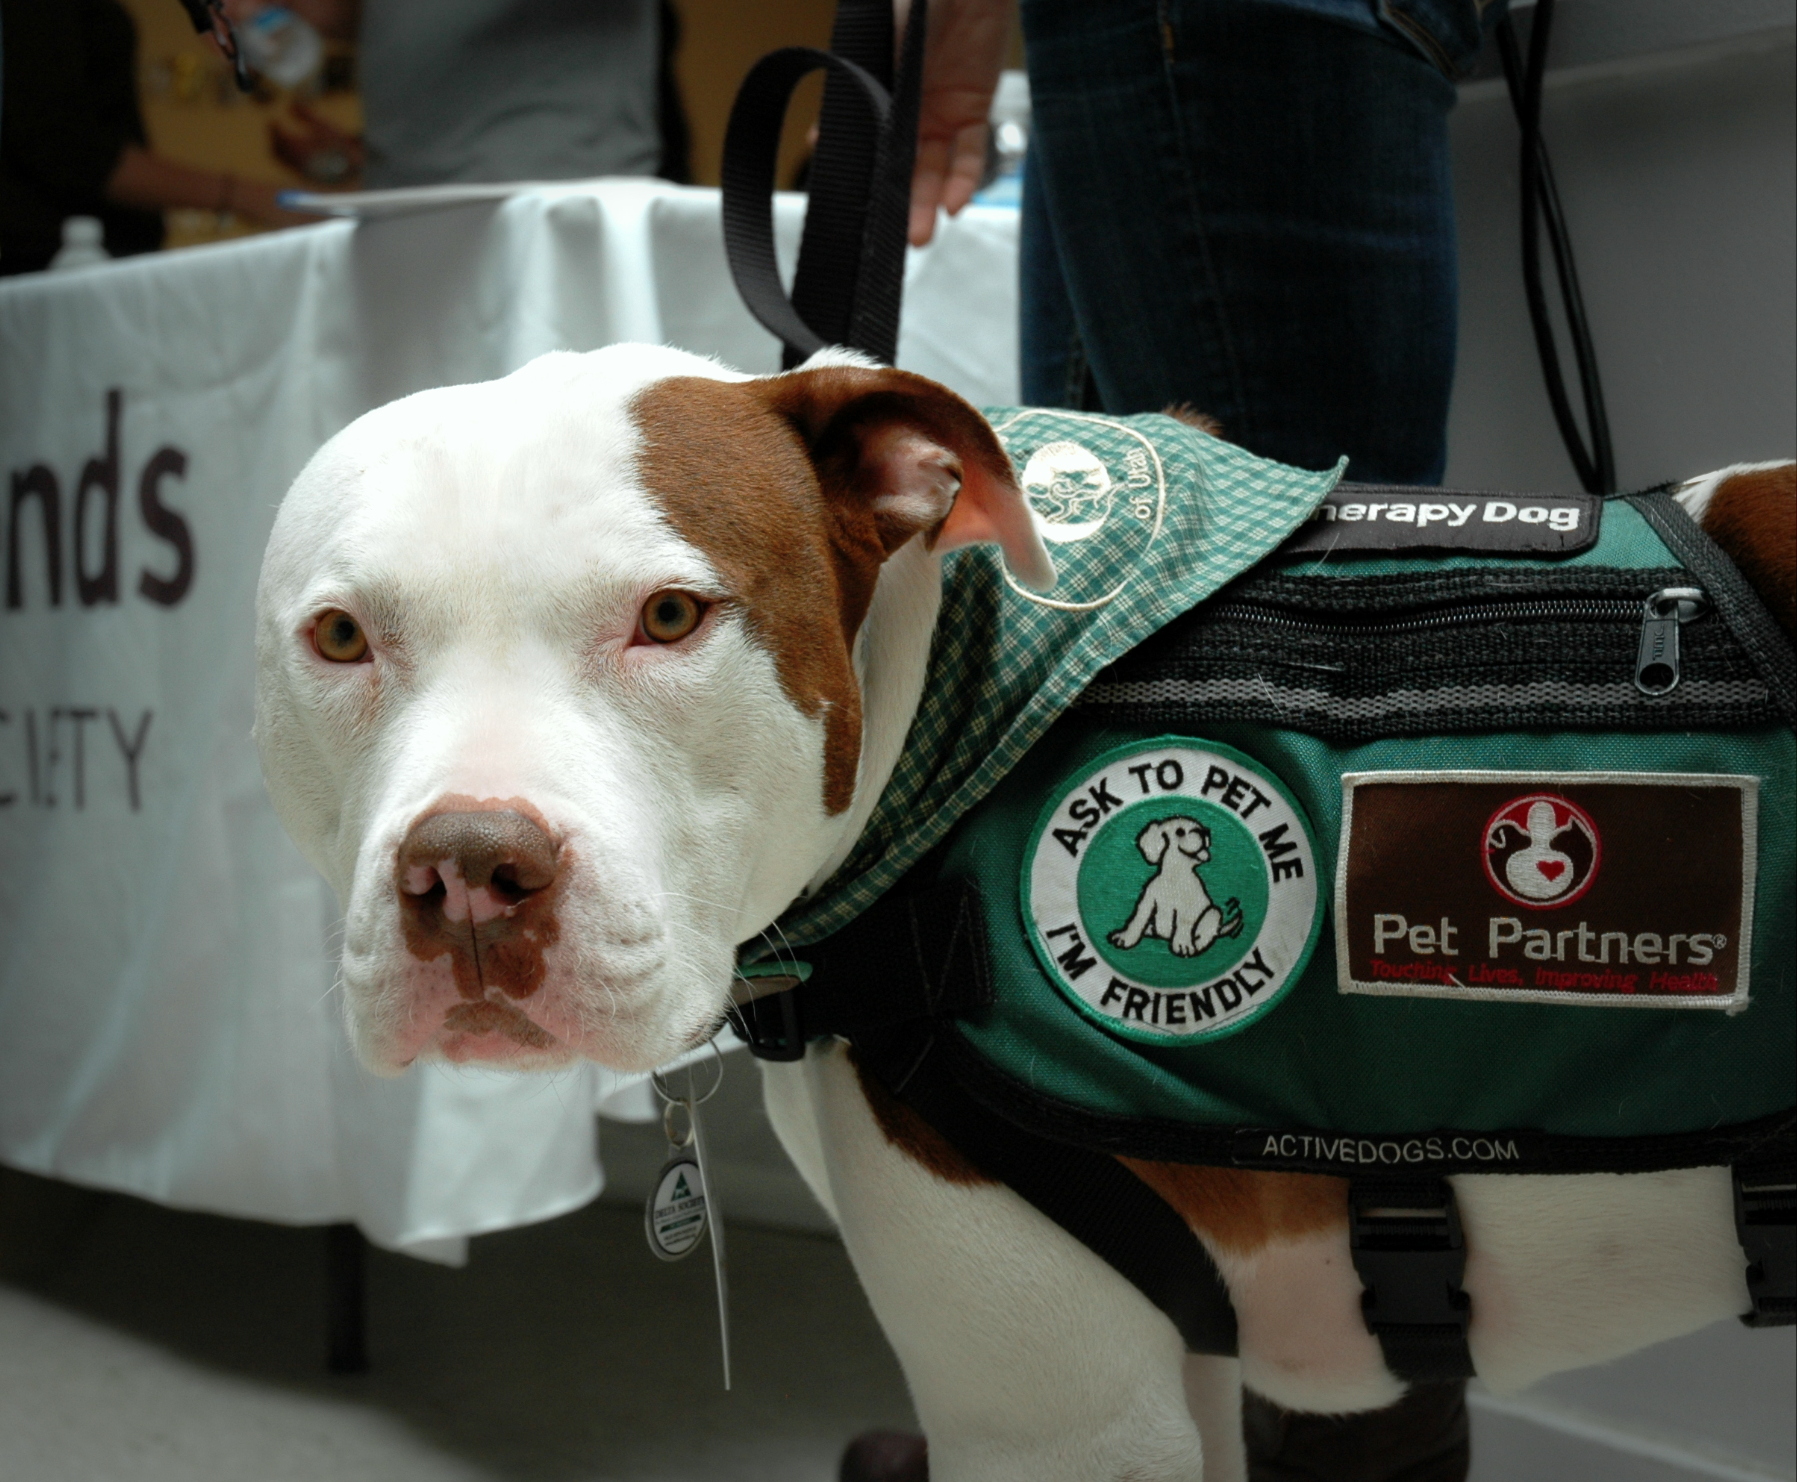 Captain is an adopted shelter pit bull who now works as a certified therapy dog.